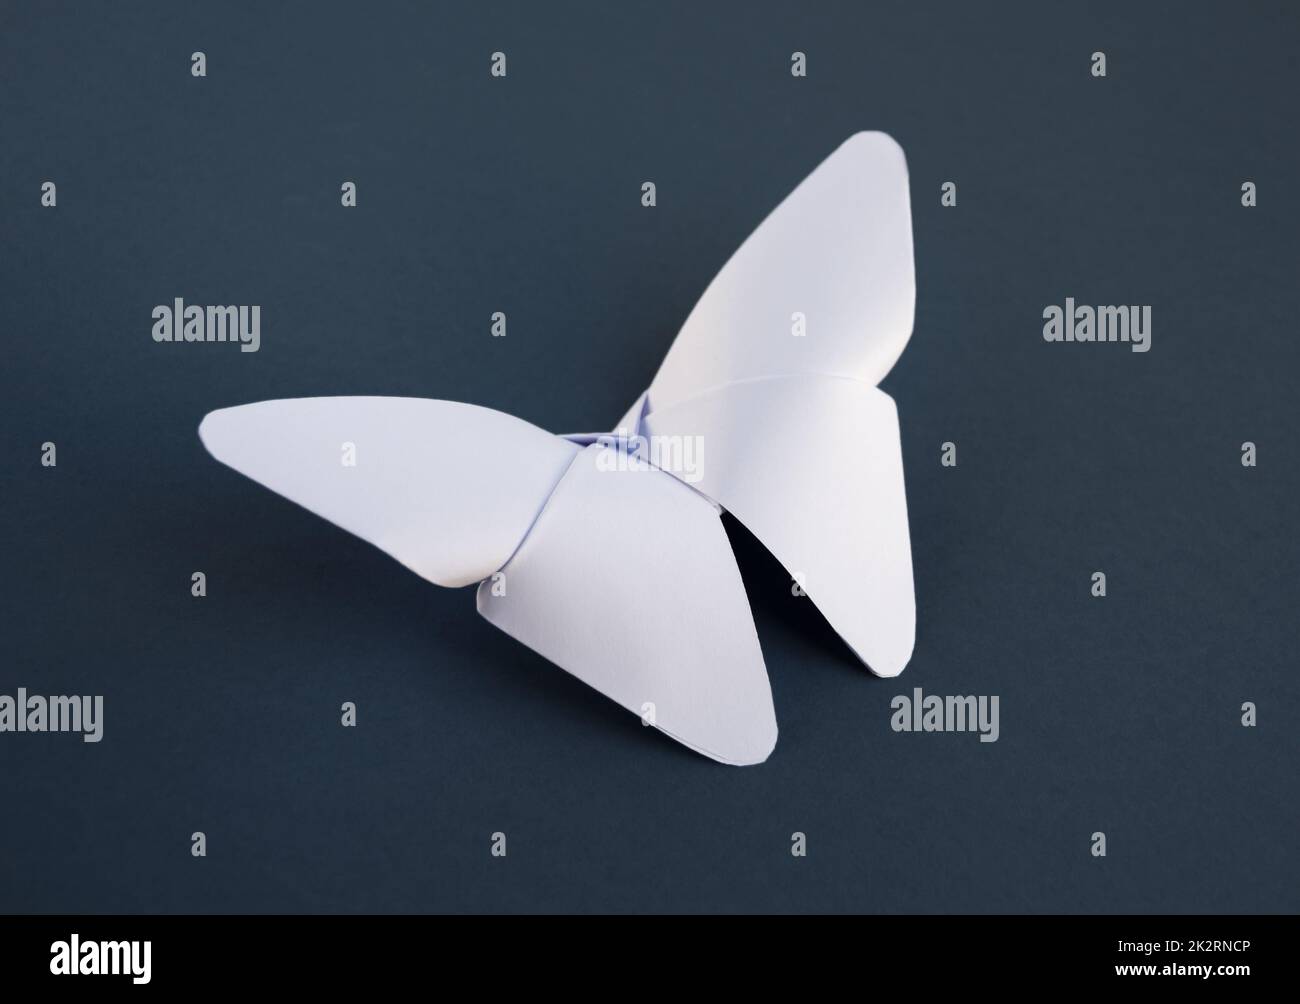 Paper Butterfly, How to make Origami Butterflies, Artificial Butterfly